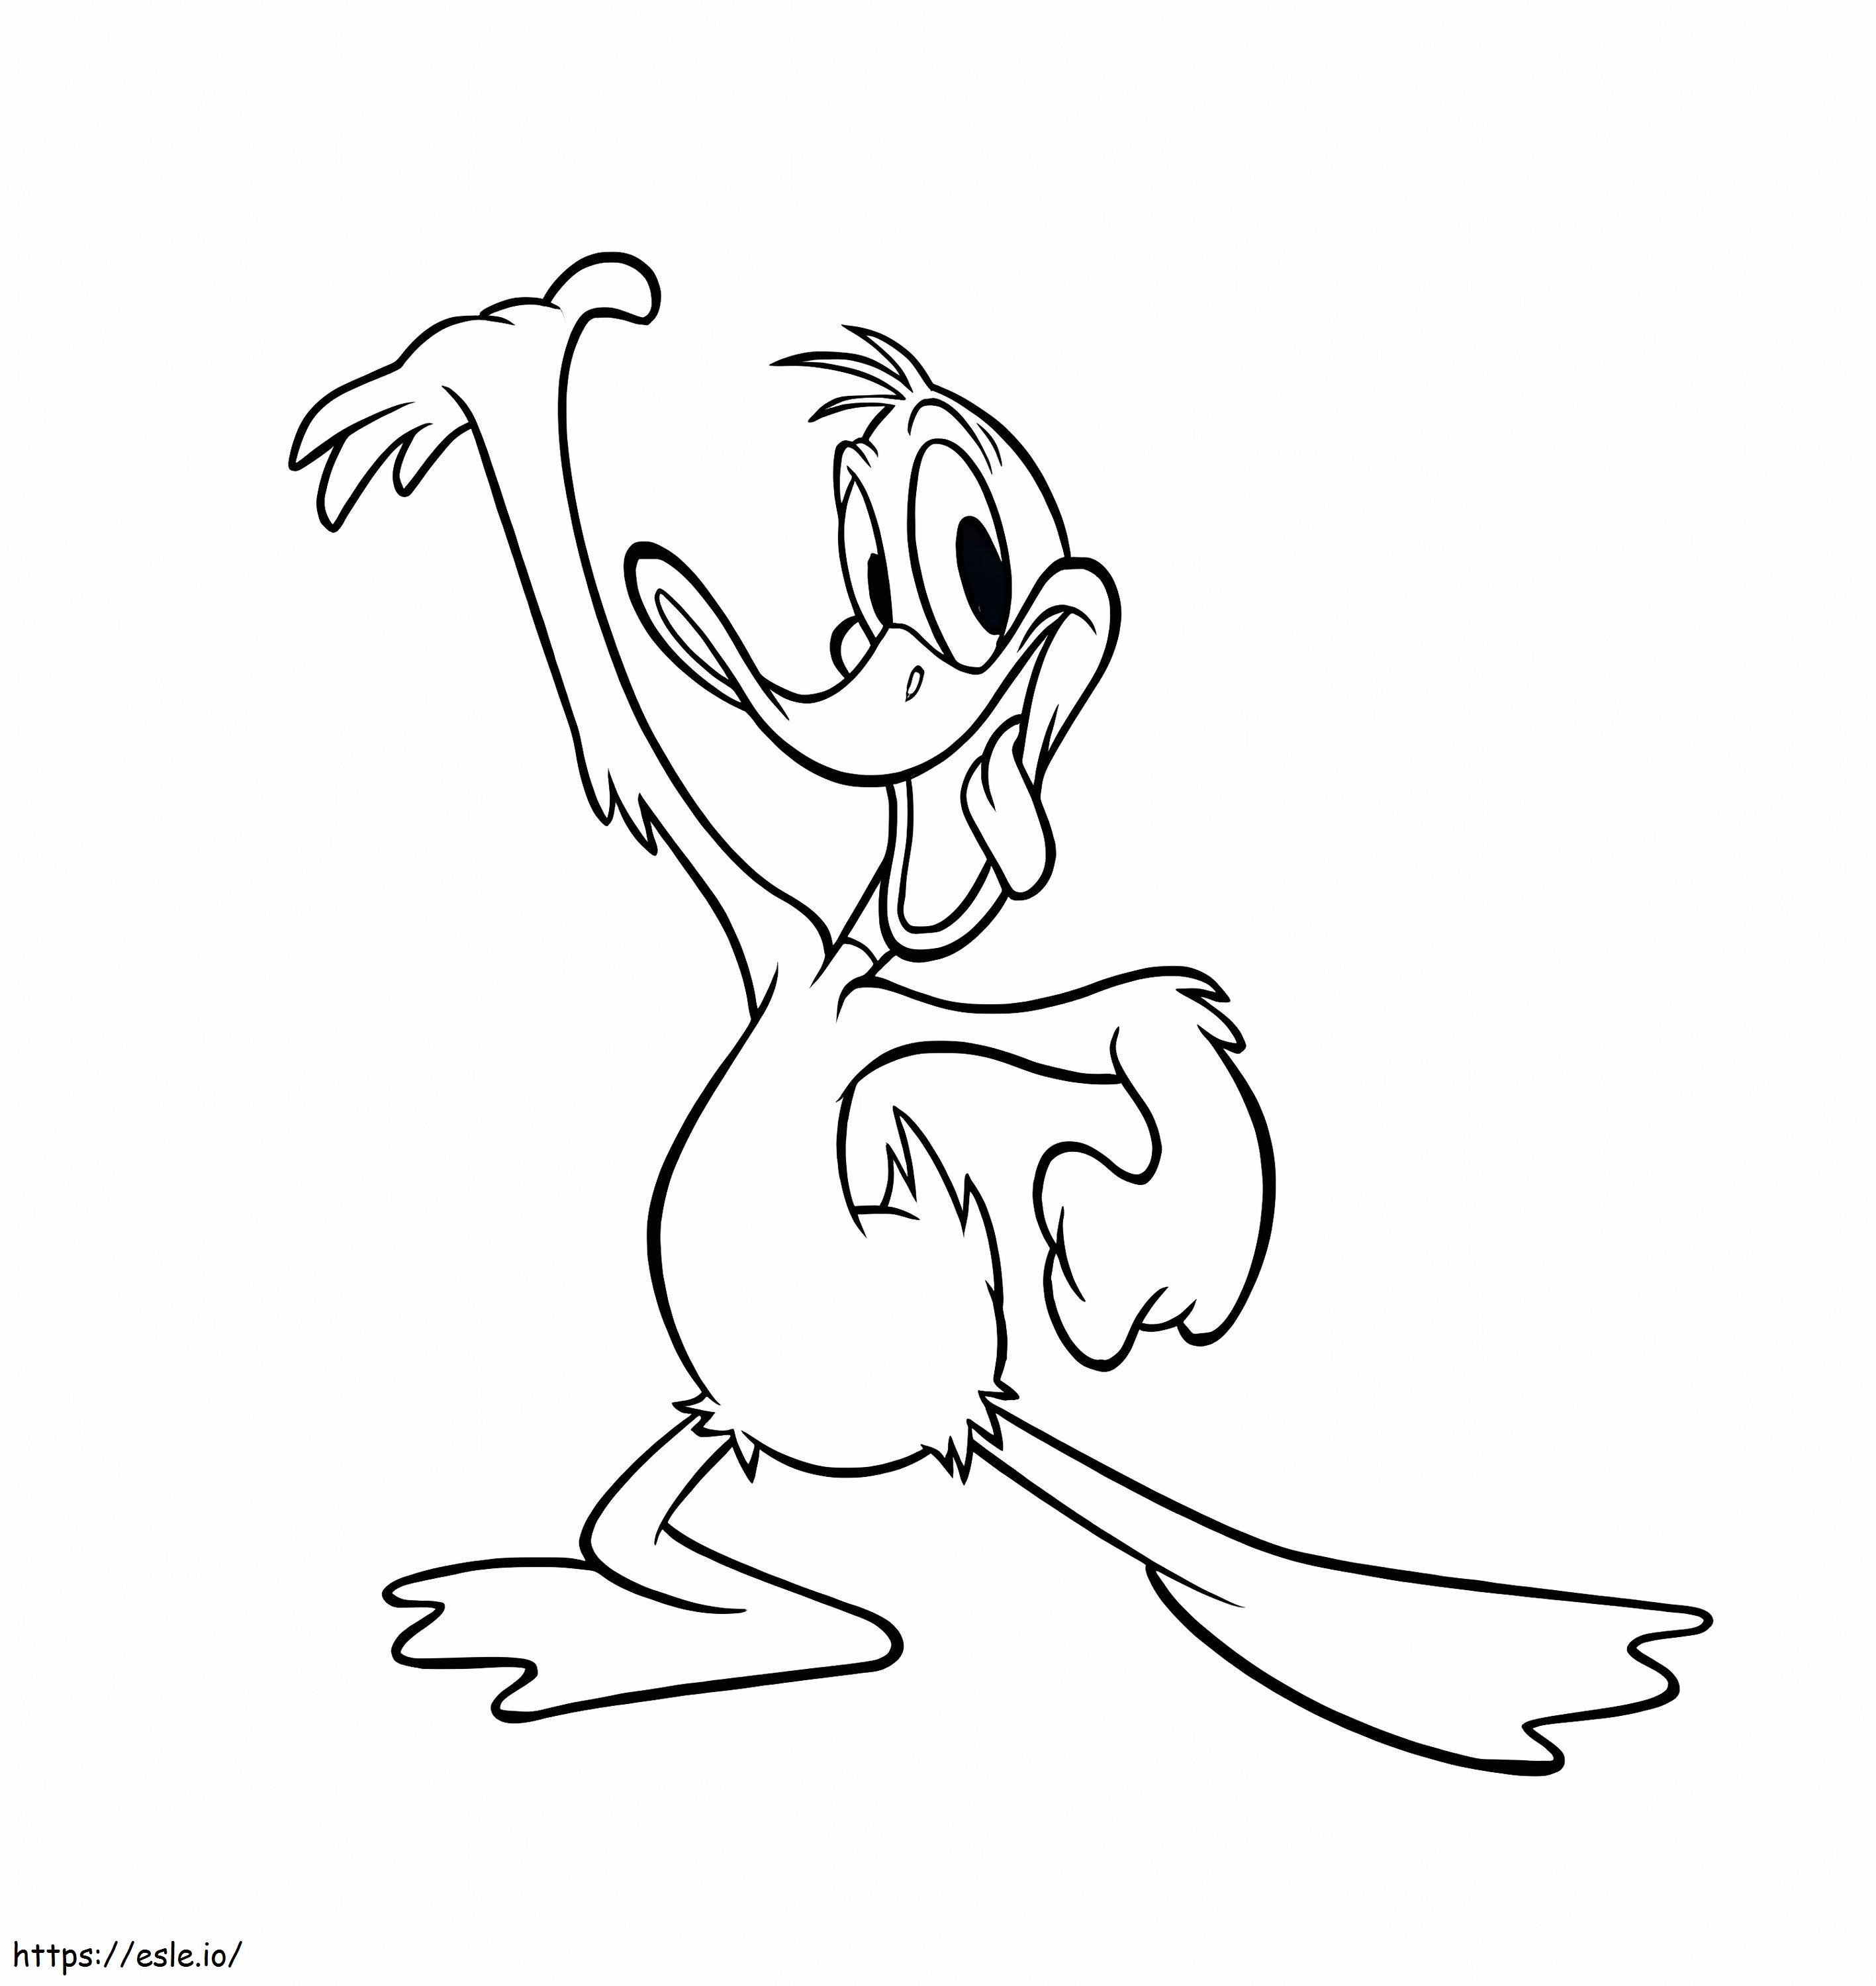 Funny Daffy Duck coloring page